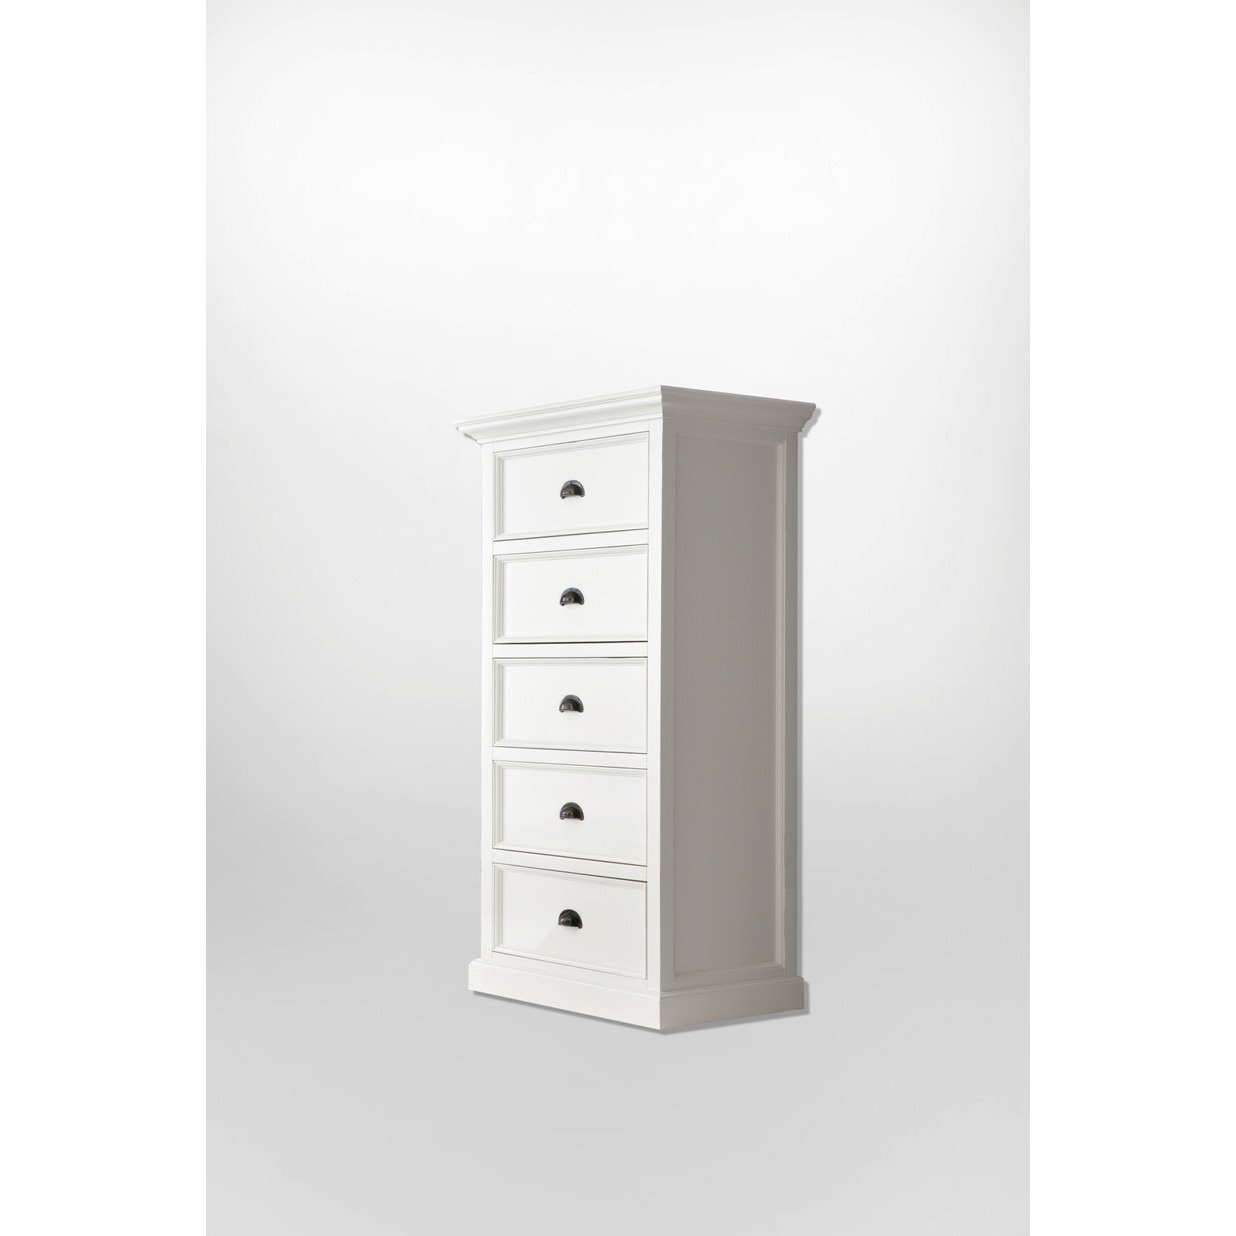 NovaSolo Halifax CA616 Chest of Drawers Chest of Drawers NovaSolo 